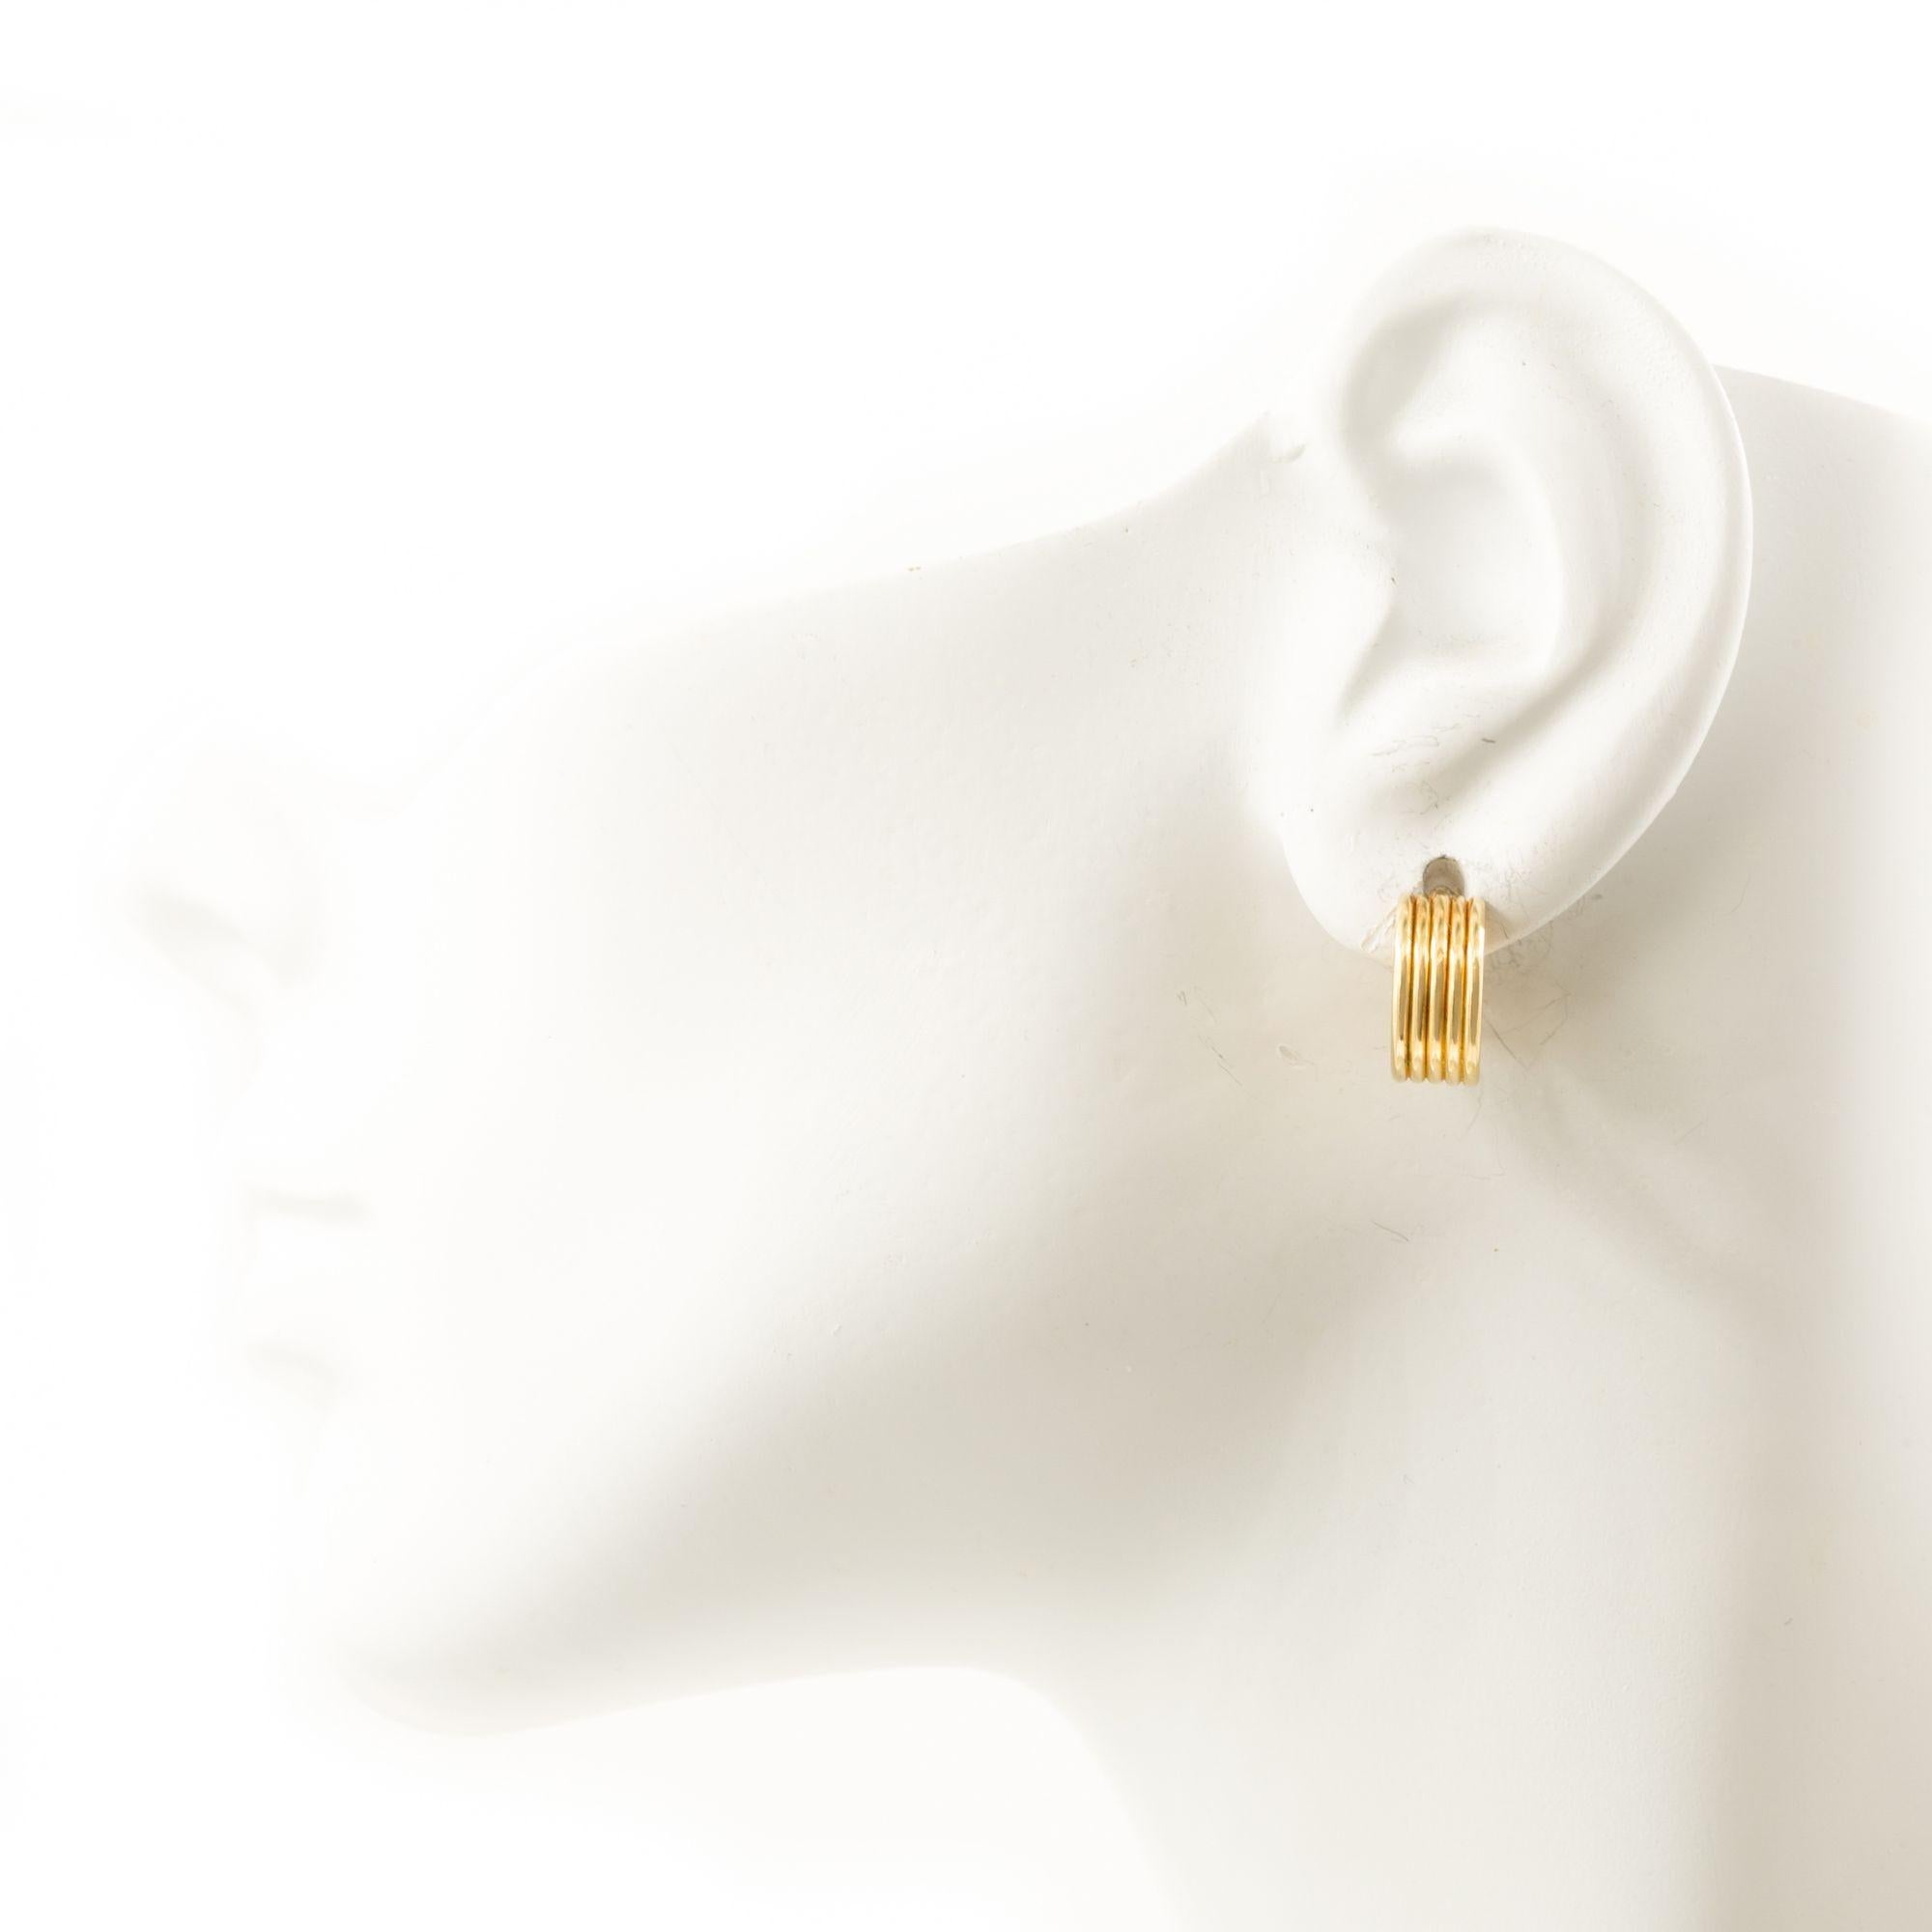 Pair of 14K Yellow Gold Ribbed Huggie Earrings
Item # C104604

A pair of 14 karat yellow gold huggie earrings with a ribbed design. These earrings are characterized by their small, hoop shape that 'hugs' the earlobe. The ribbed texture adds a